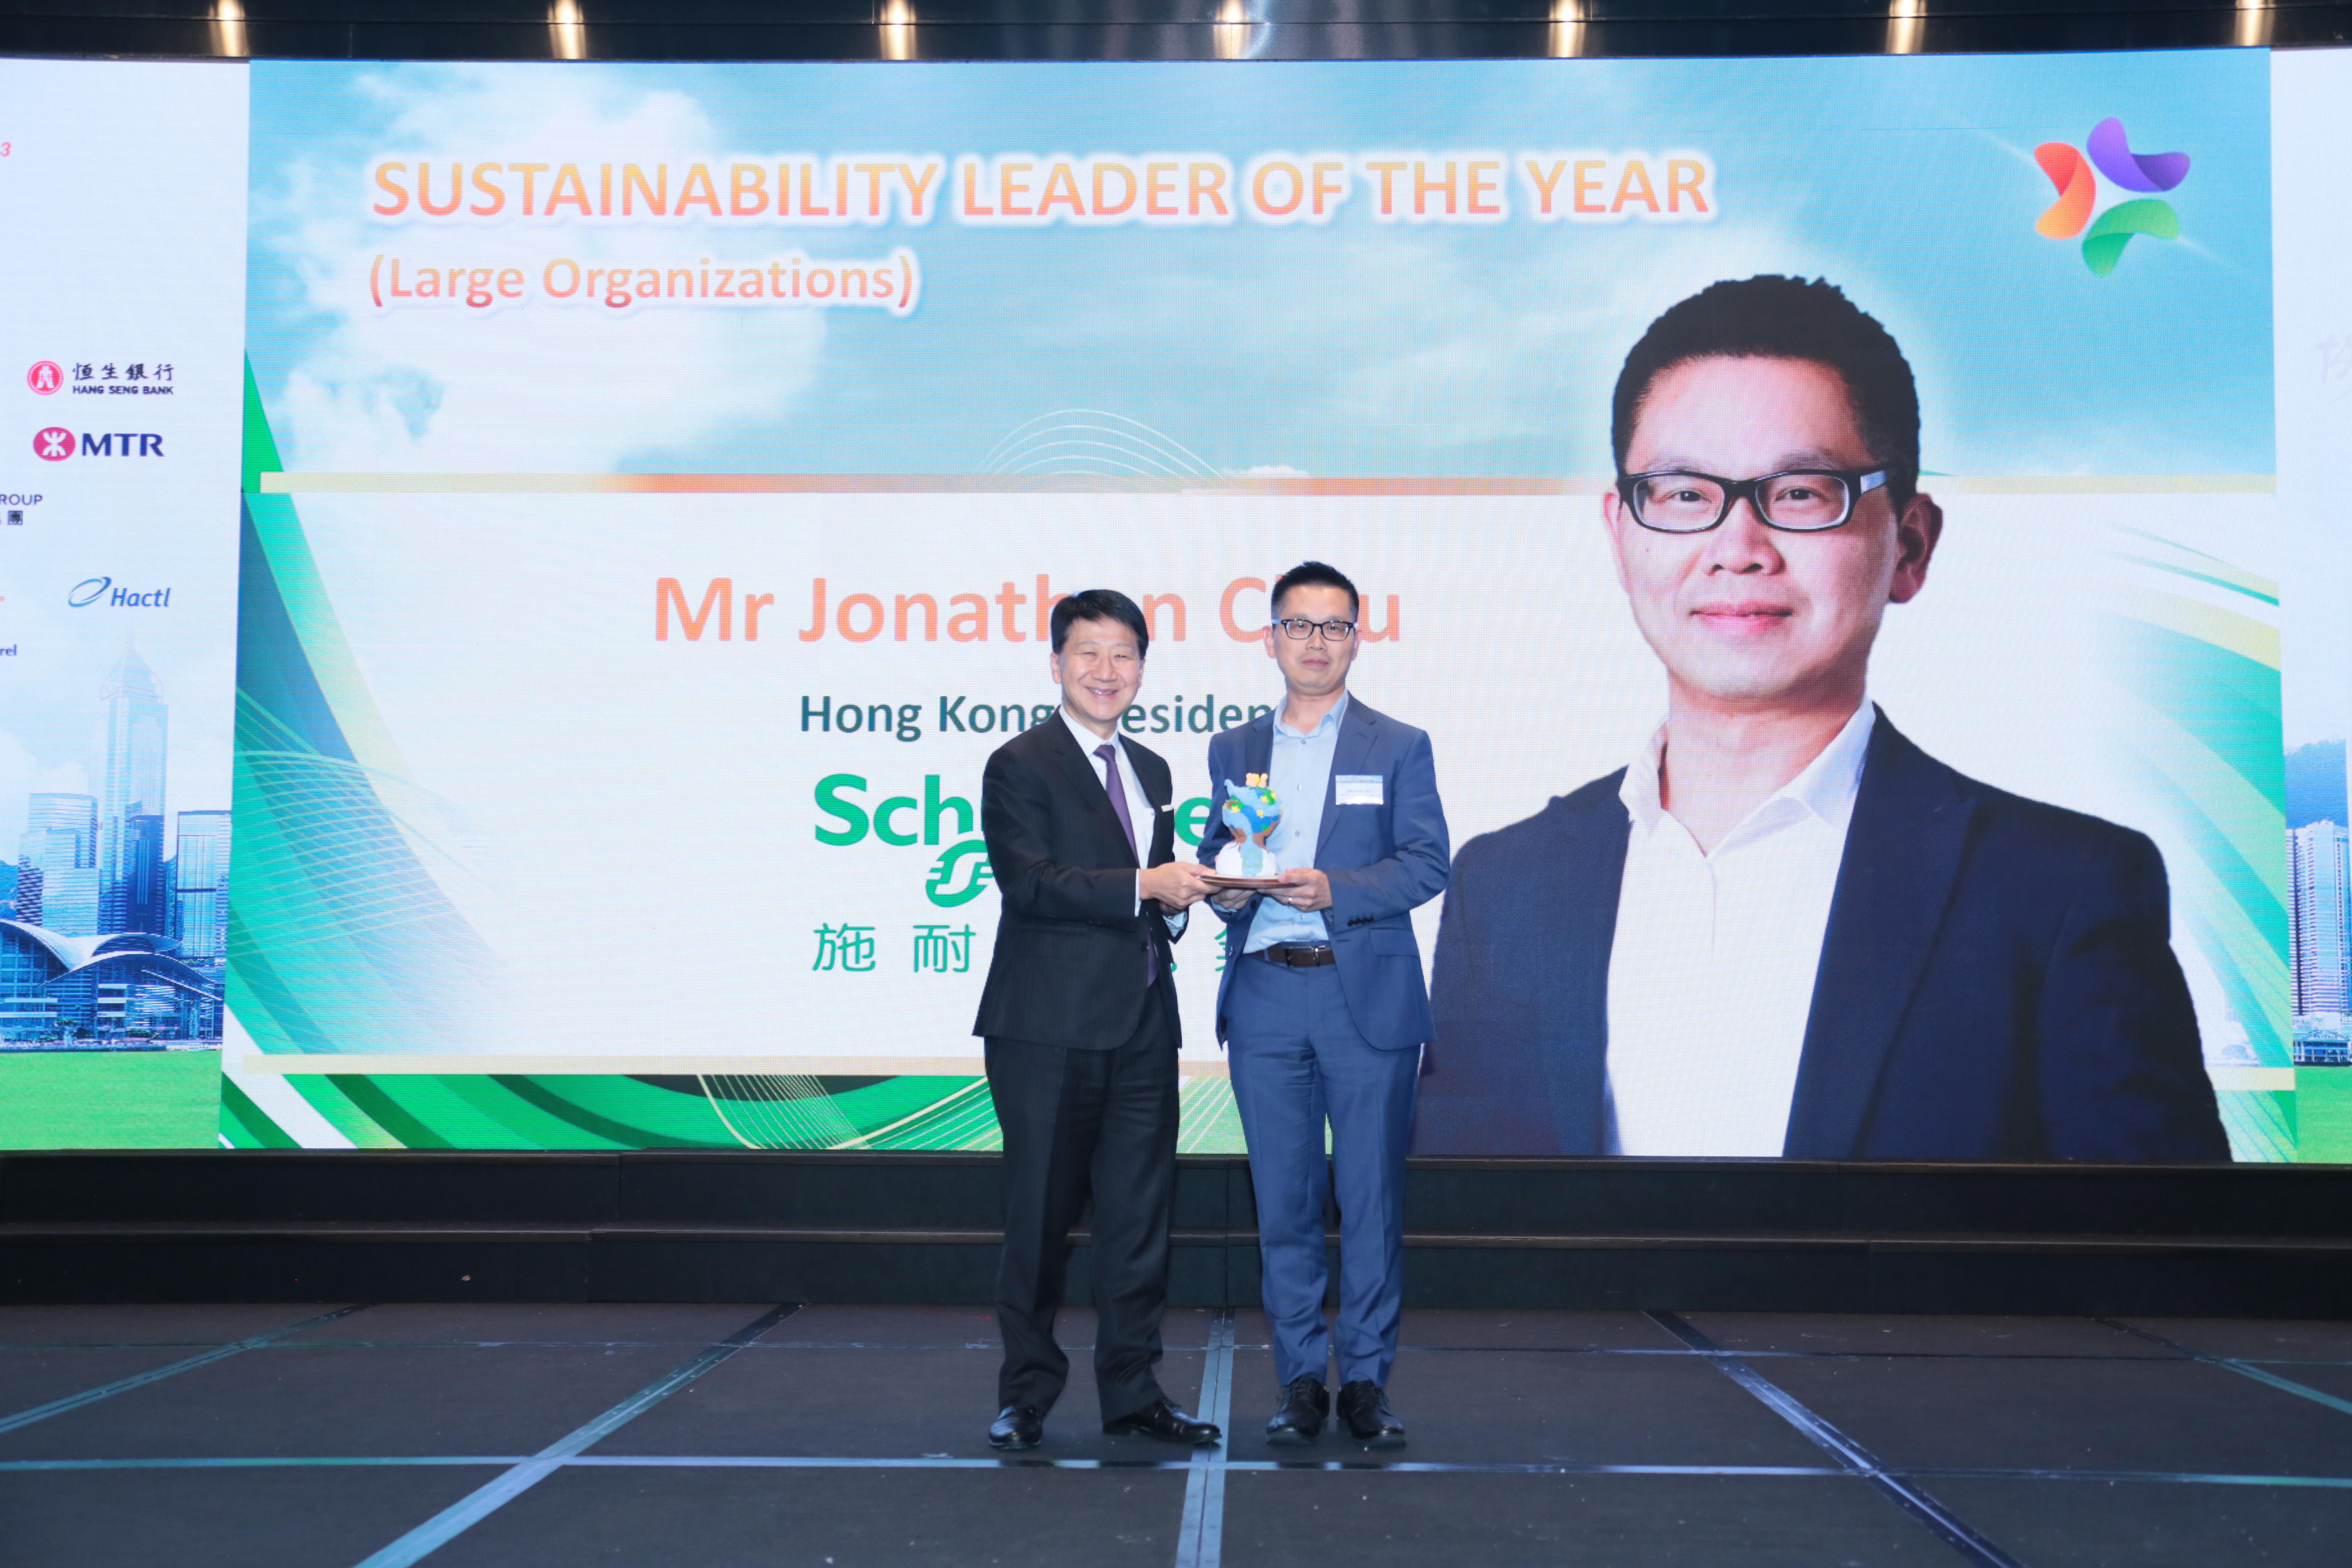 Jonathan Chiu, President of Schneider Electric Hong Kong, was awarded Sustainability Leader of the Year and the Distinguished Sustainability Leadership Award (Large Organizations Category) at the HKMA Hong Kong Sustainability Award 2023.